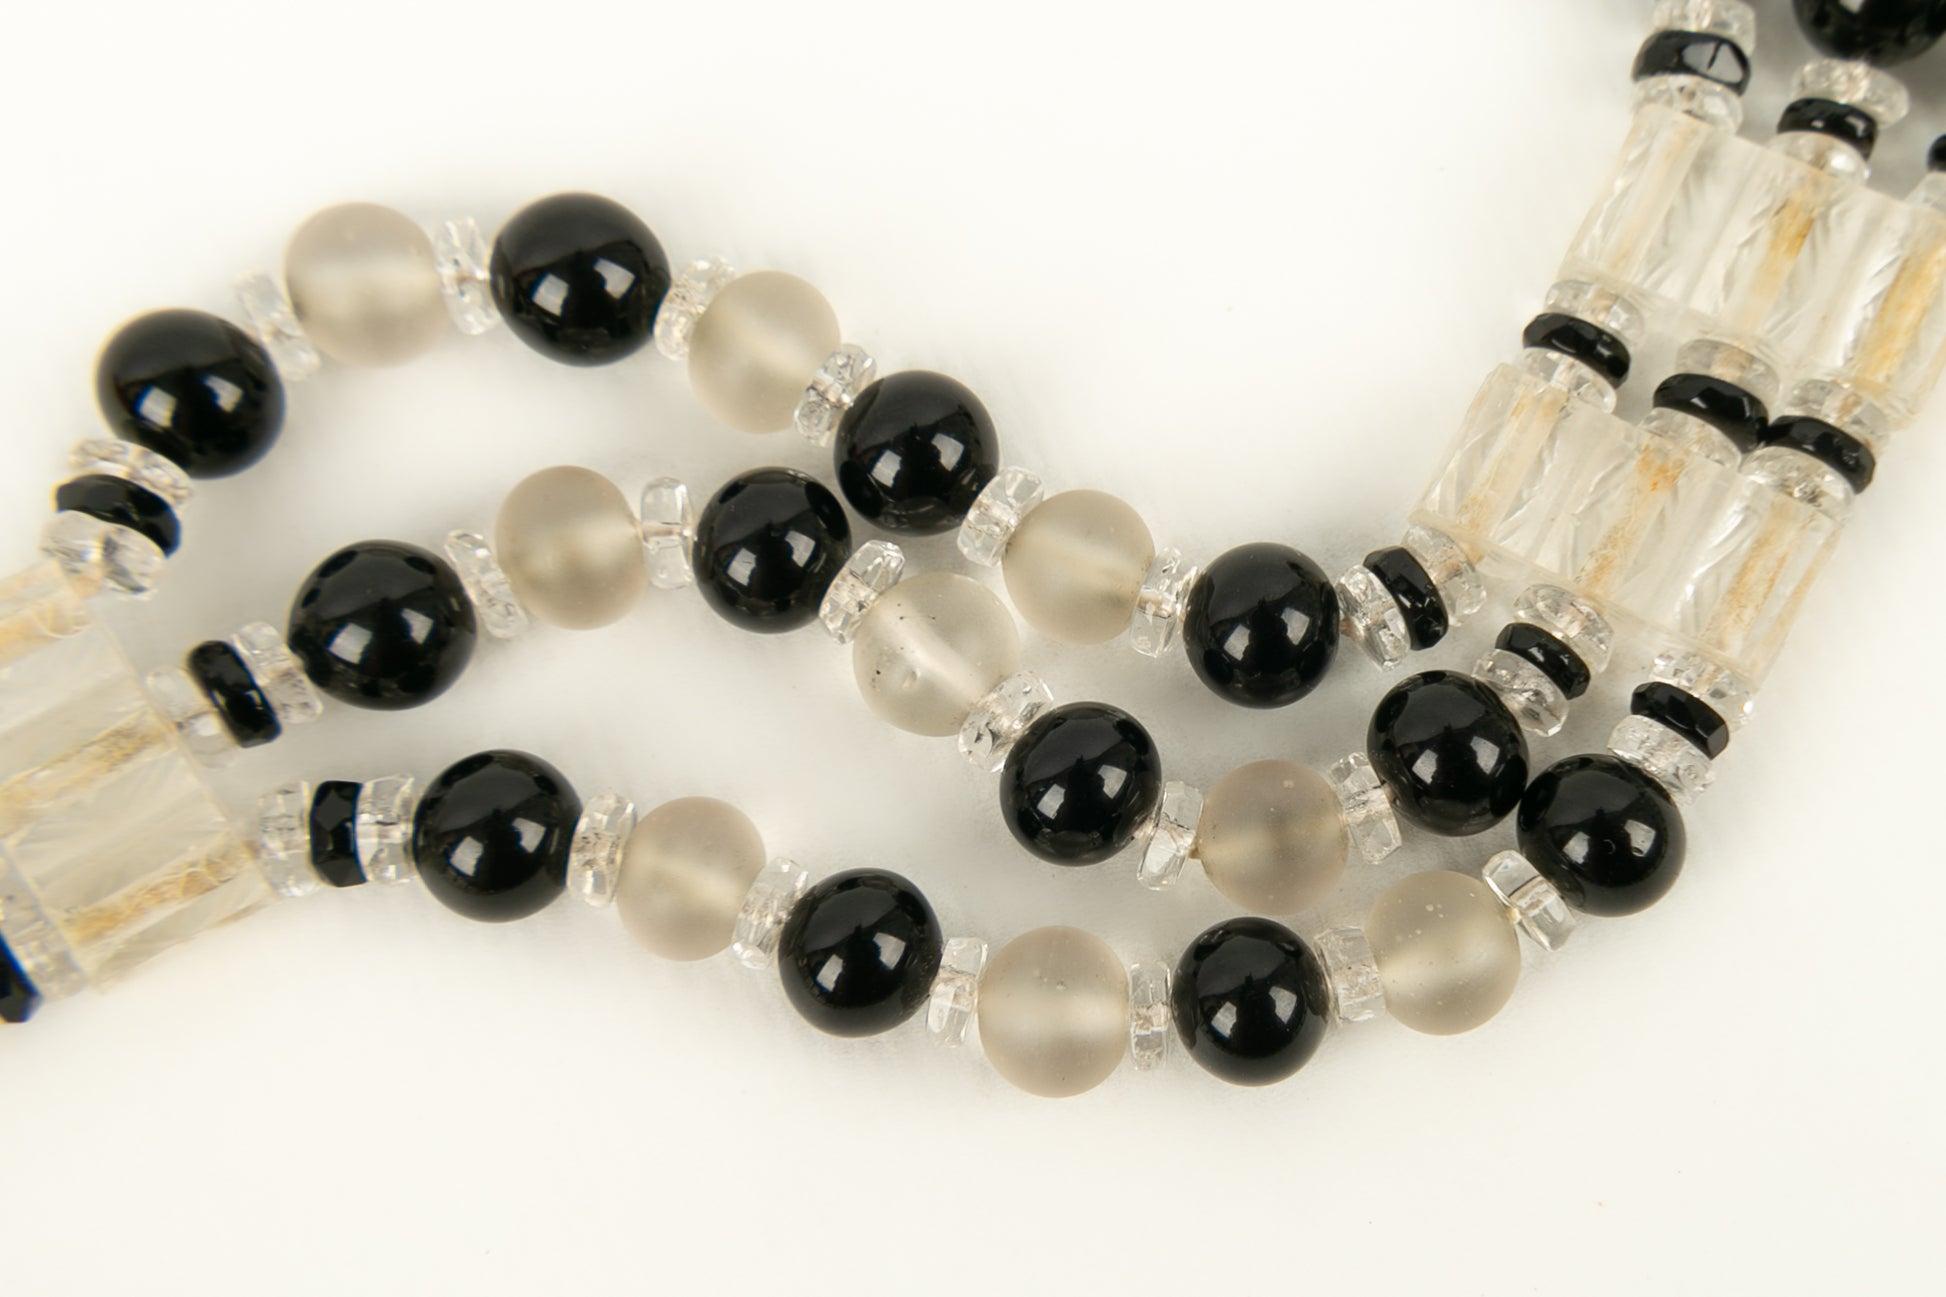 Rousselet Necklace in Transparent and Black Glass Pearls, 1920s For Sale 2